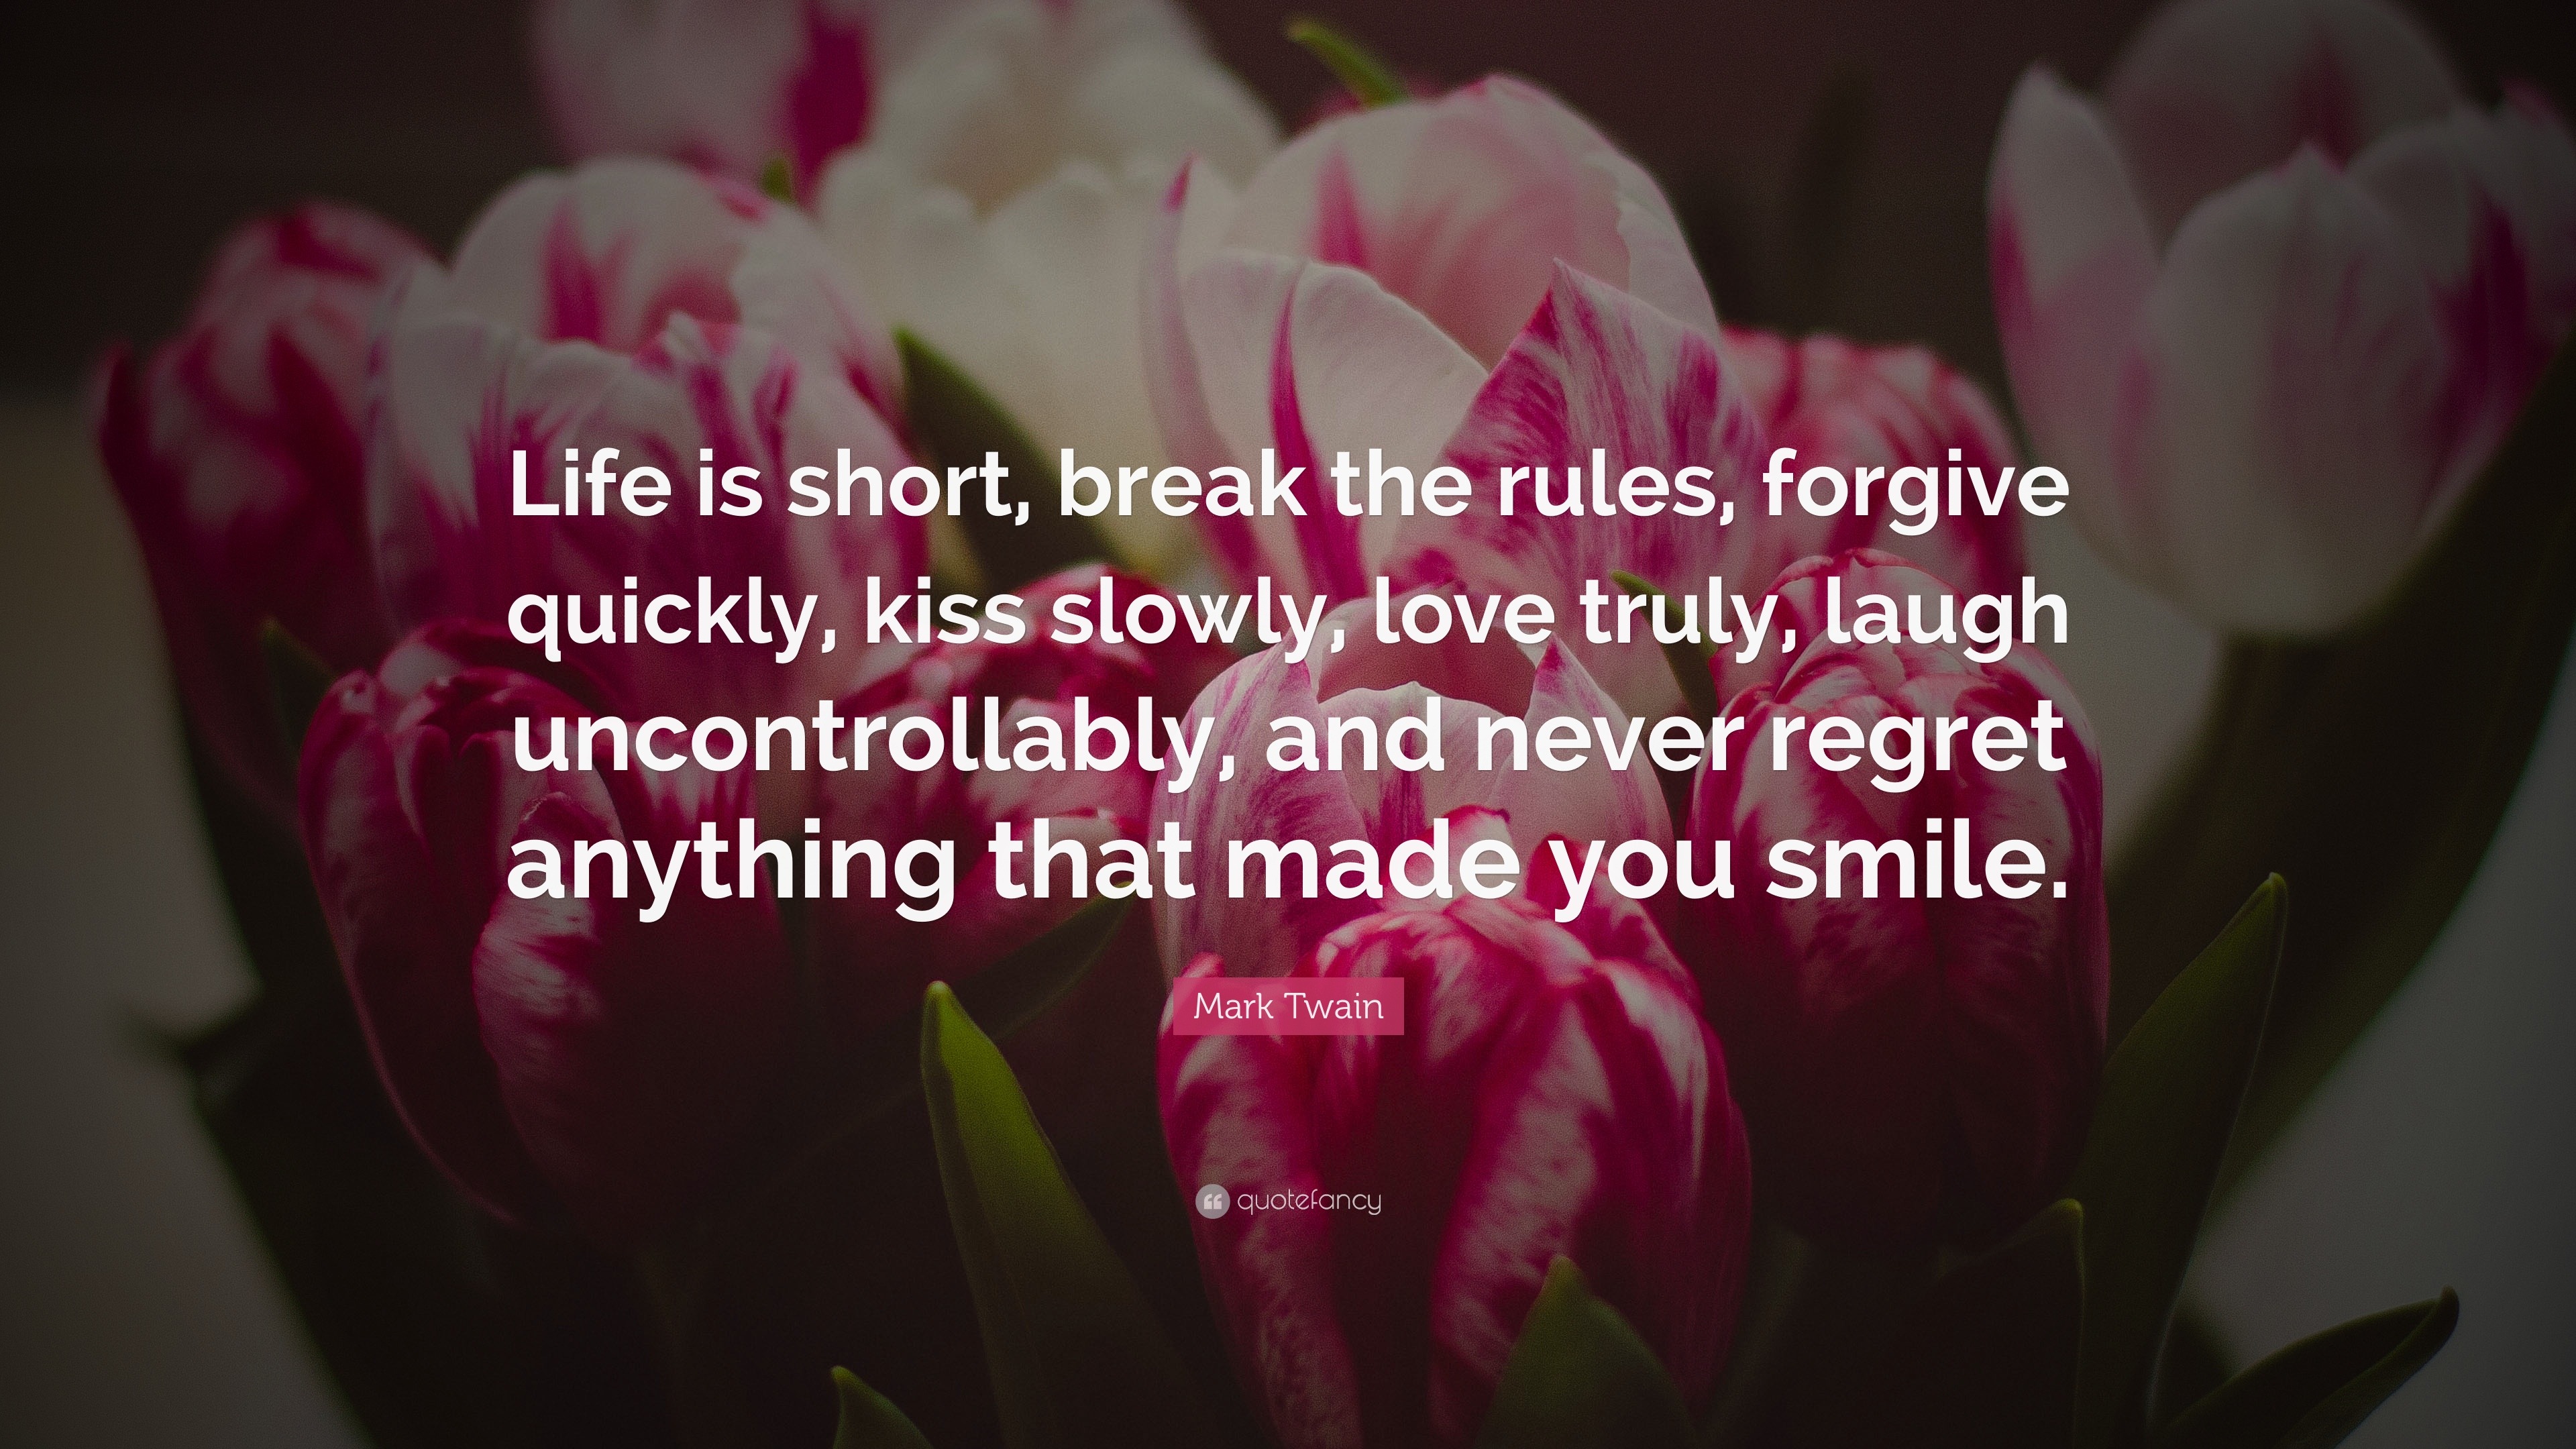 Mark Twain Quote “Life is short break the rules forgive quickly